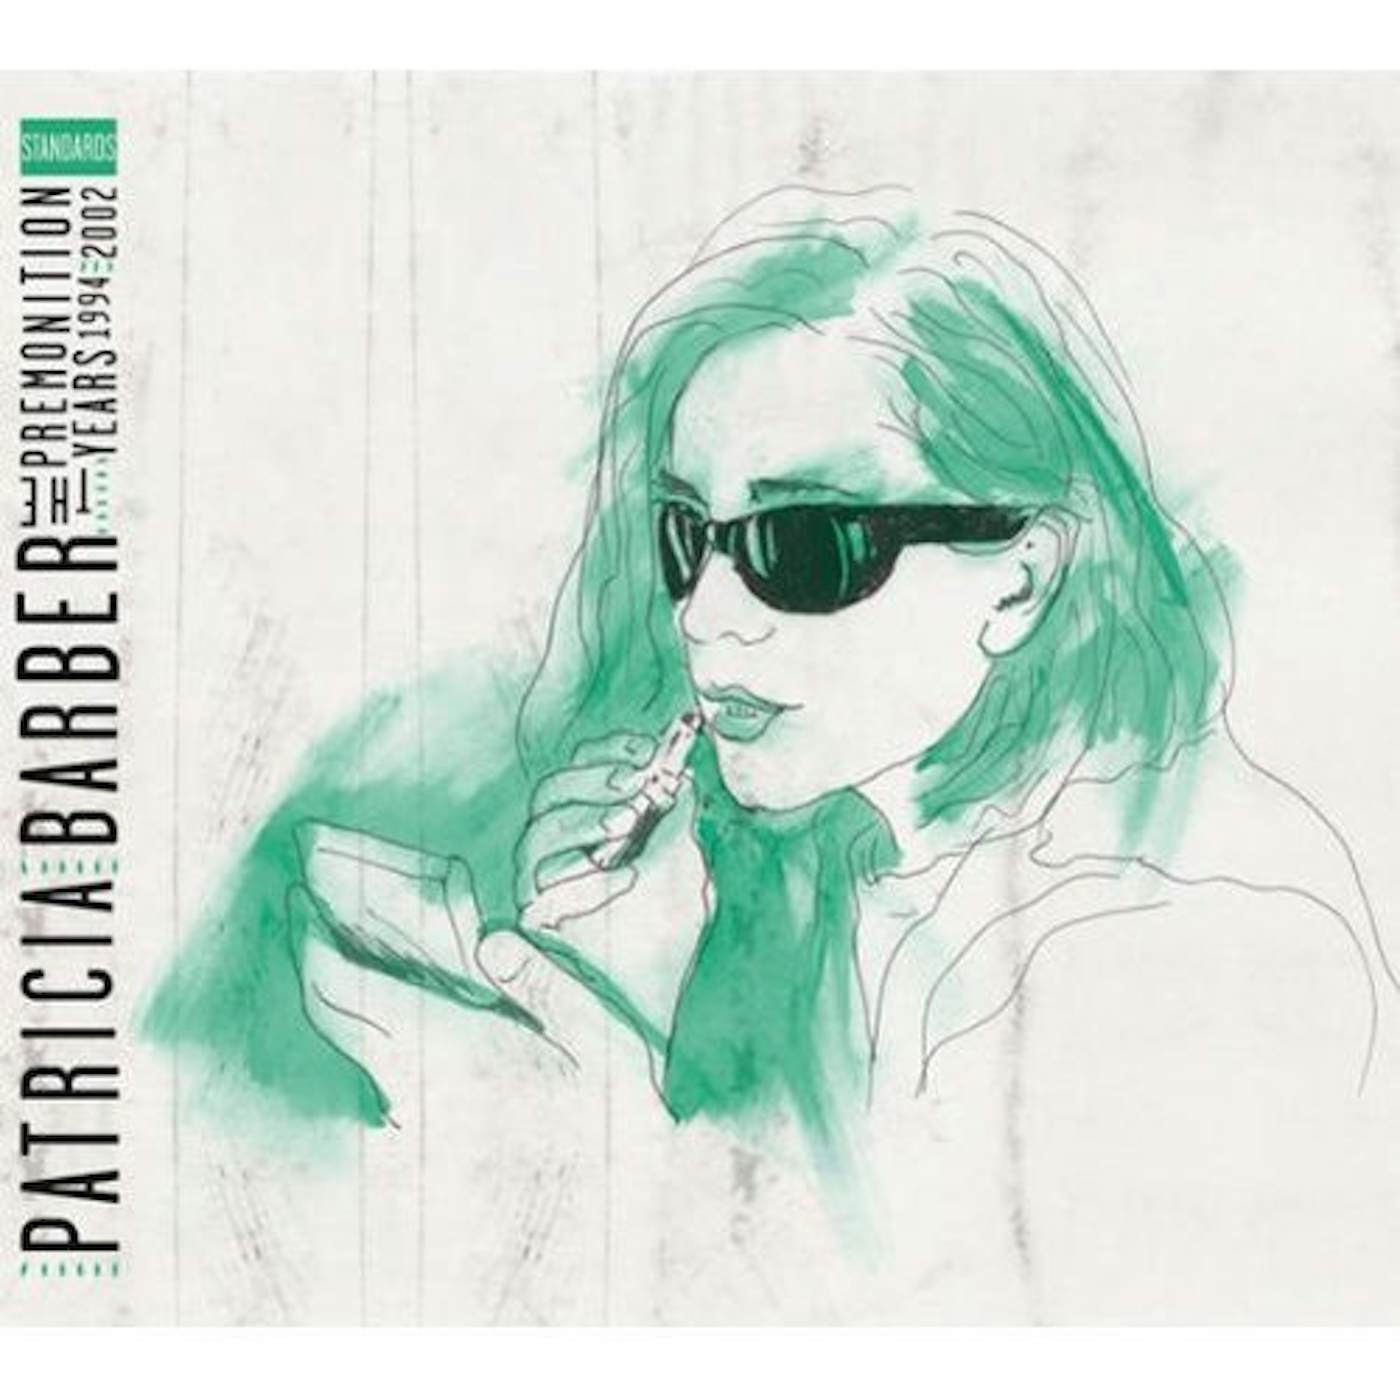 Patricia Barber PREMONITION YEARS 1994-2002: STANDARDS CD